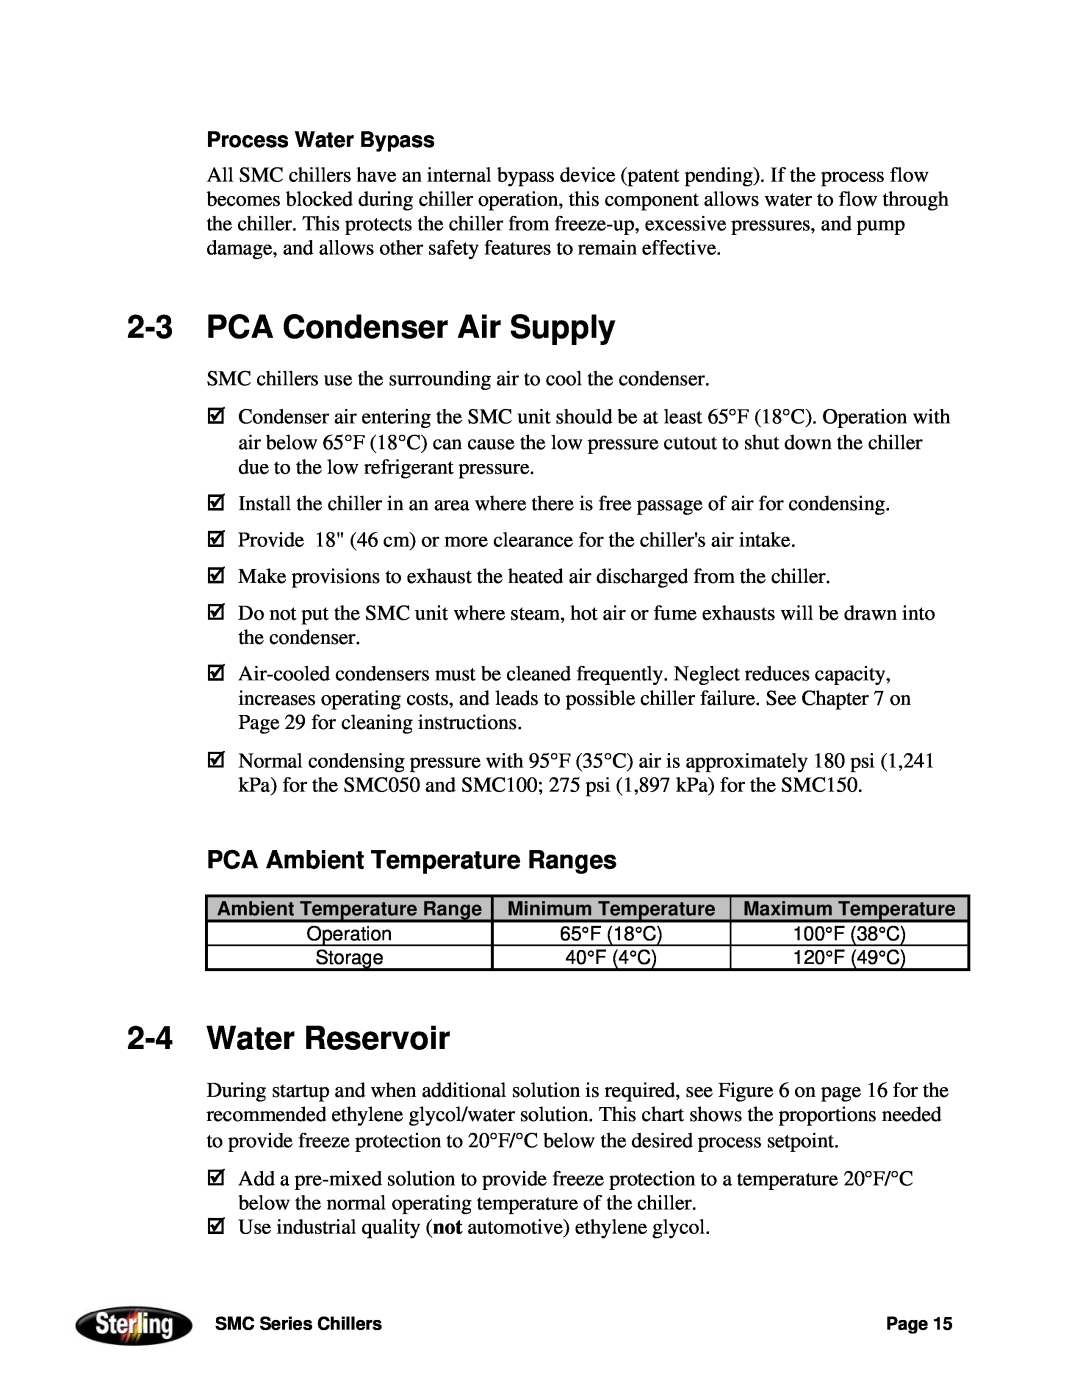 Sterling Power Products 30F to 65F 2-3PCA Condenser Air Supply, 2-4Water Reservoir, PCA Ambient Temperature Ranges 